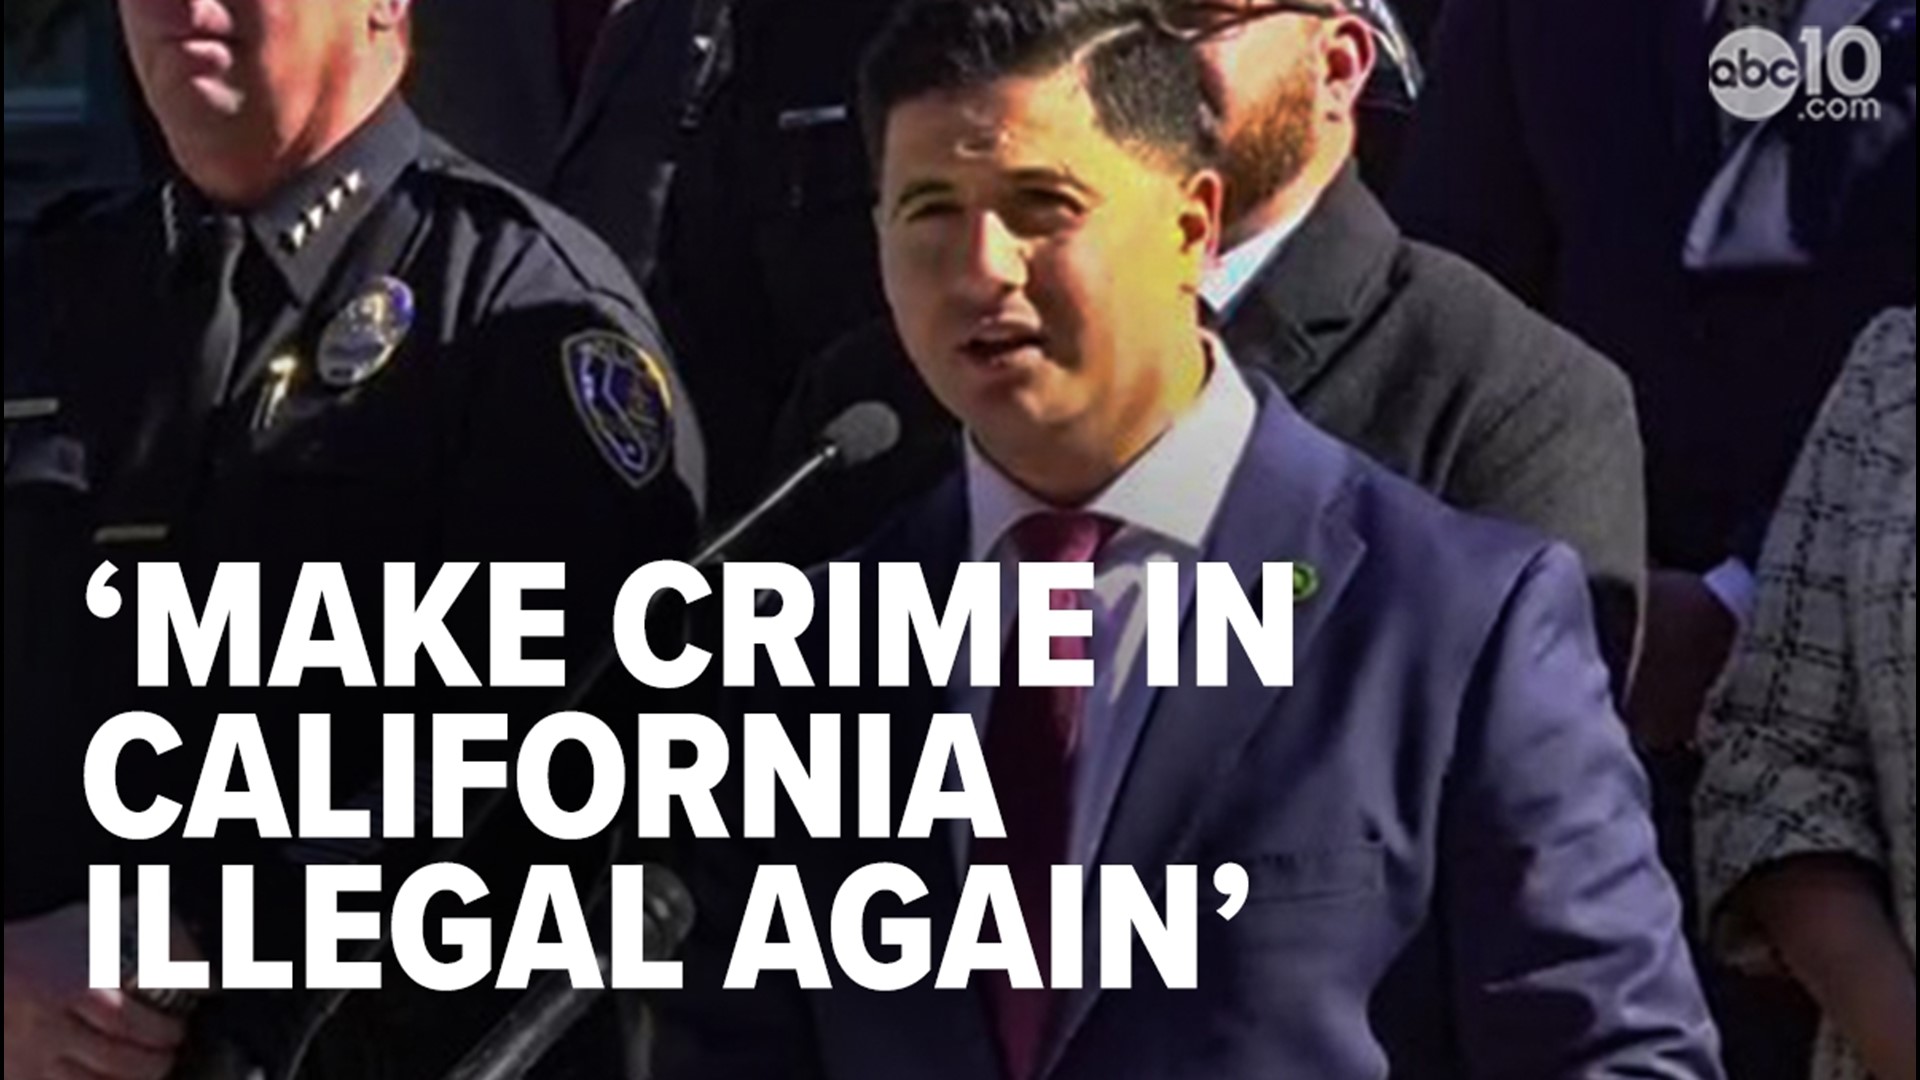 California state legislators are tired of seeing crime and criminals seemingly getting slaps on the wrists, and Republicans are introducing new law proposals.